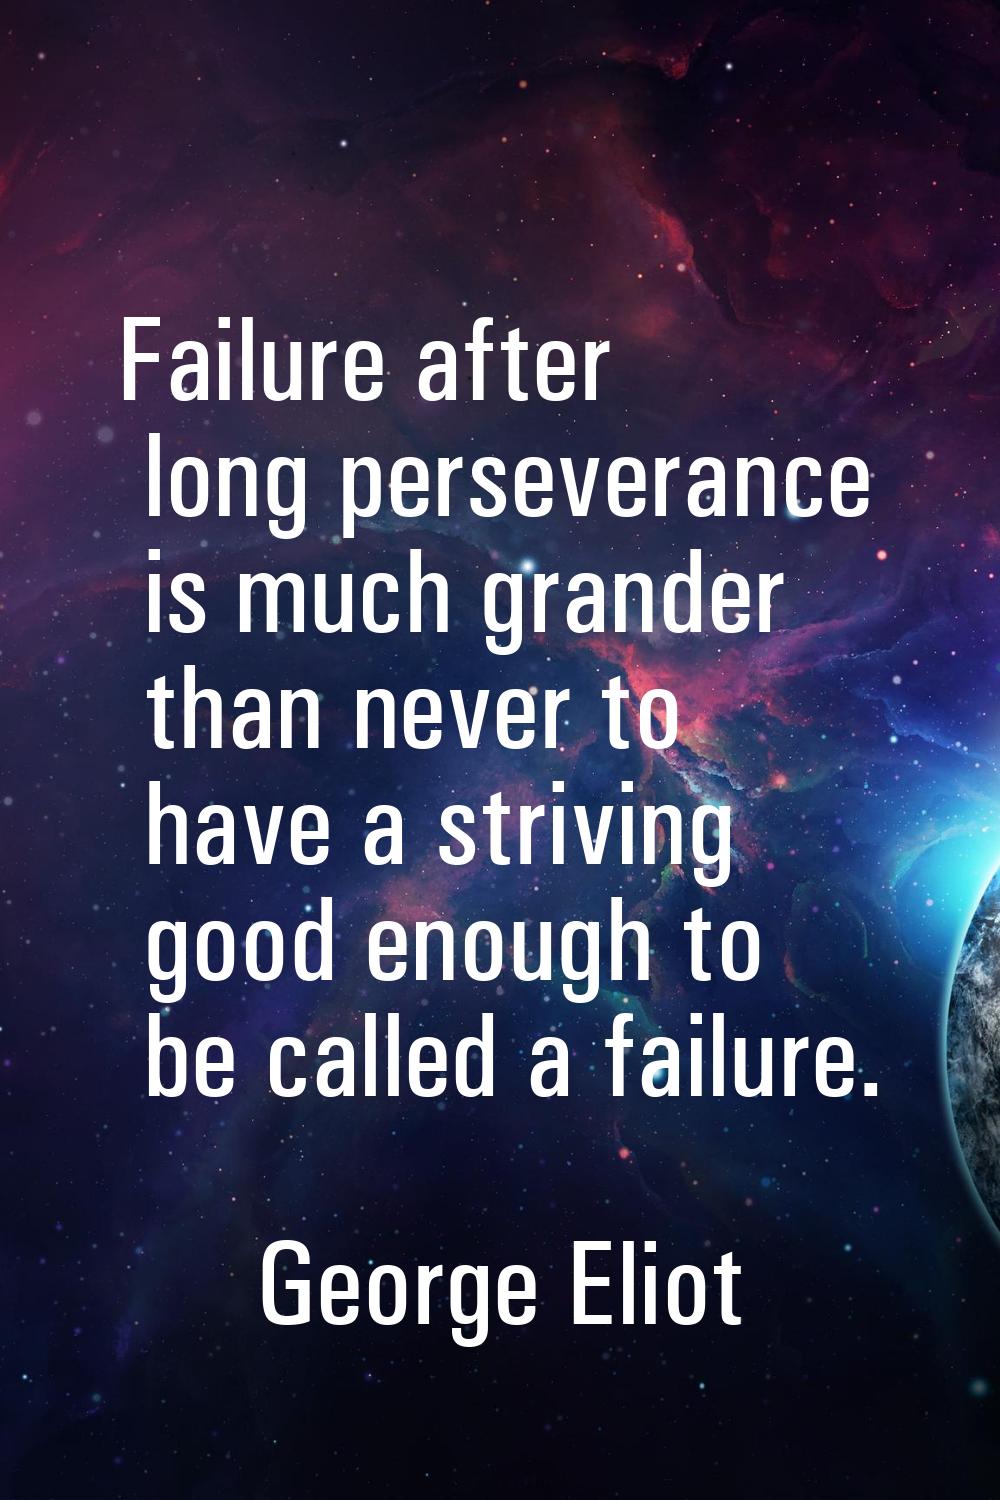 Failure after long perseverance is much grander than never to have a striving good enough to be cal